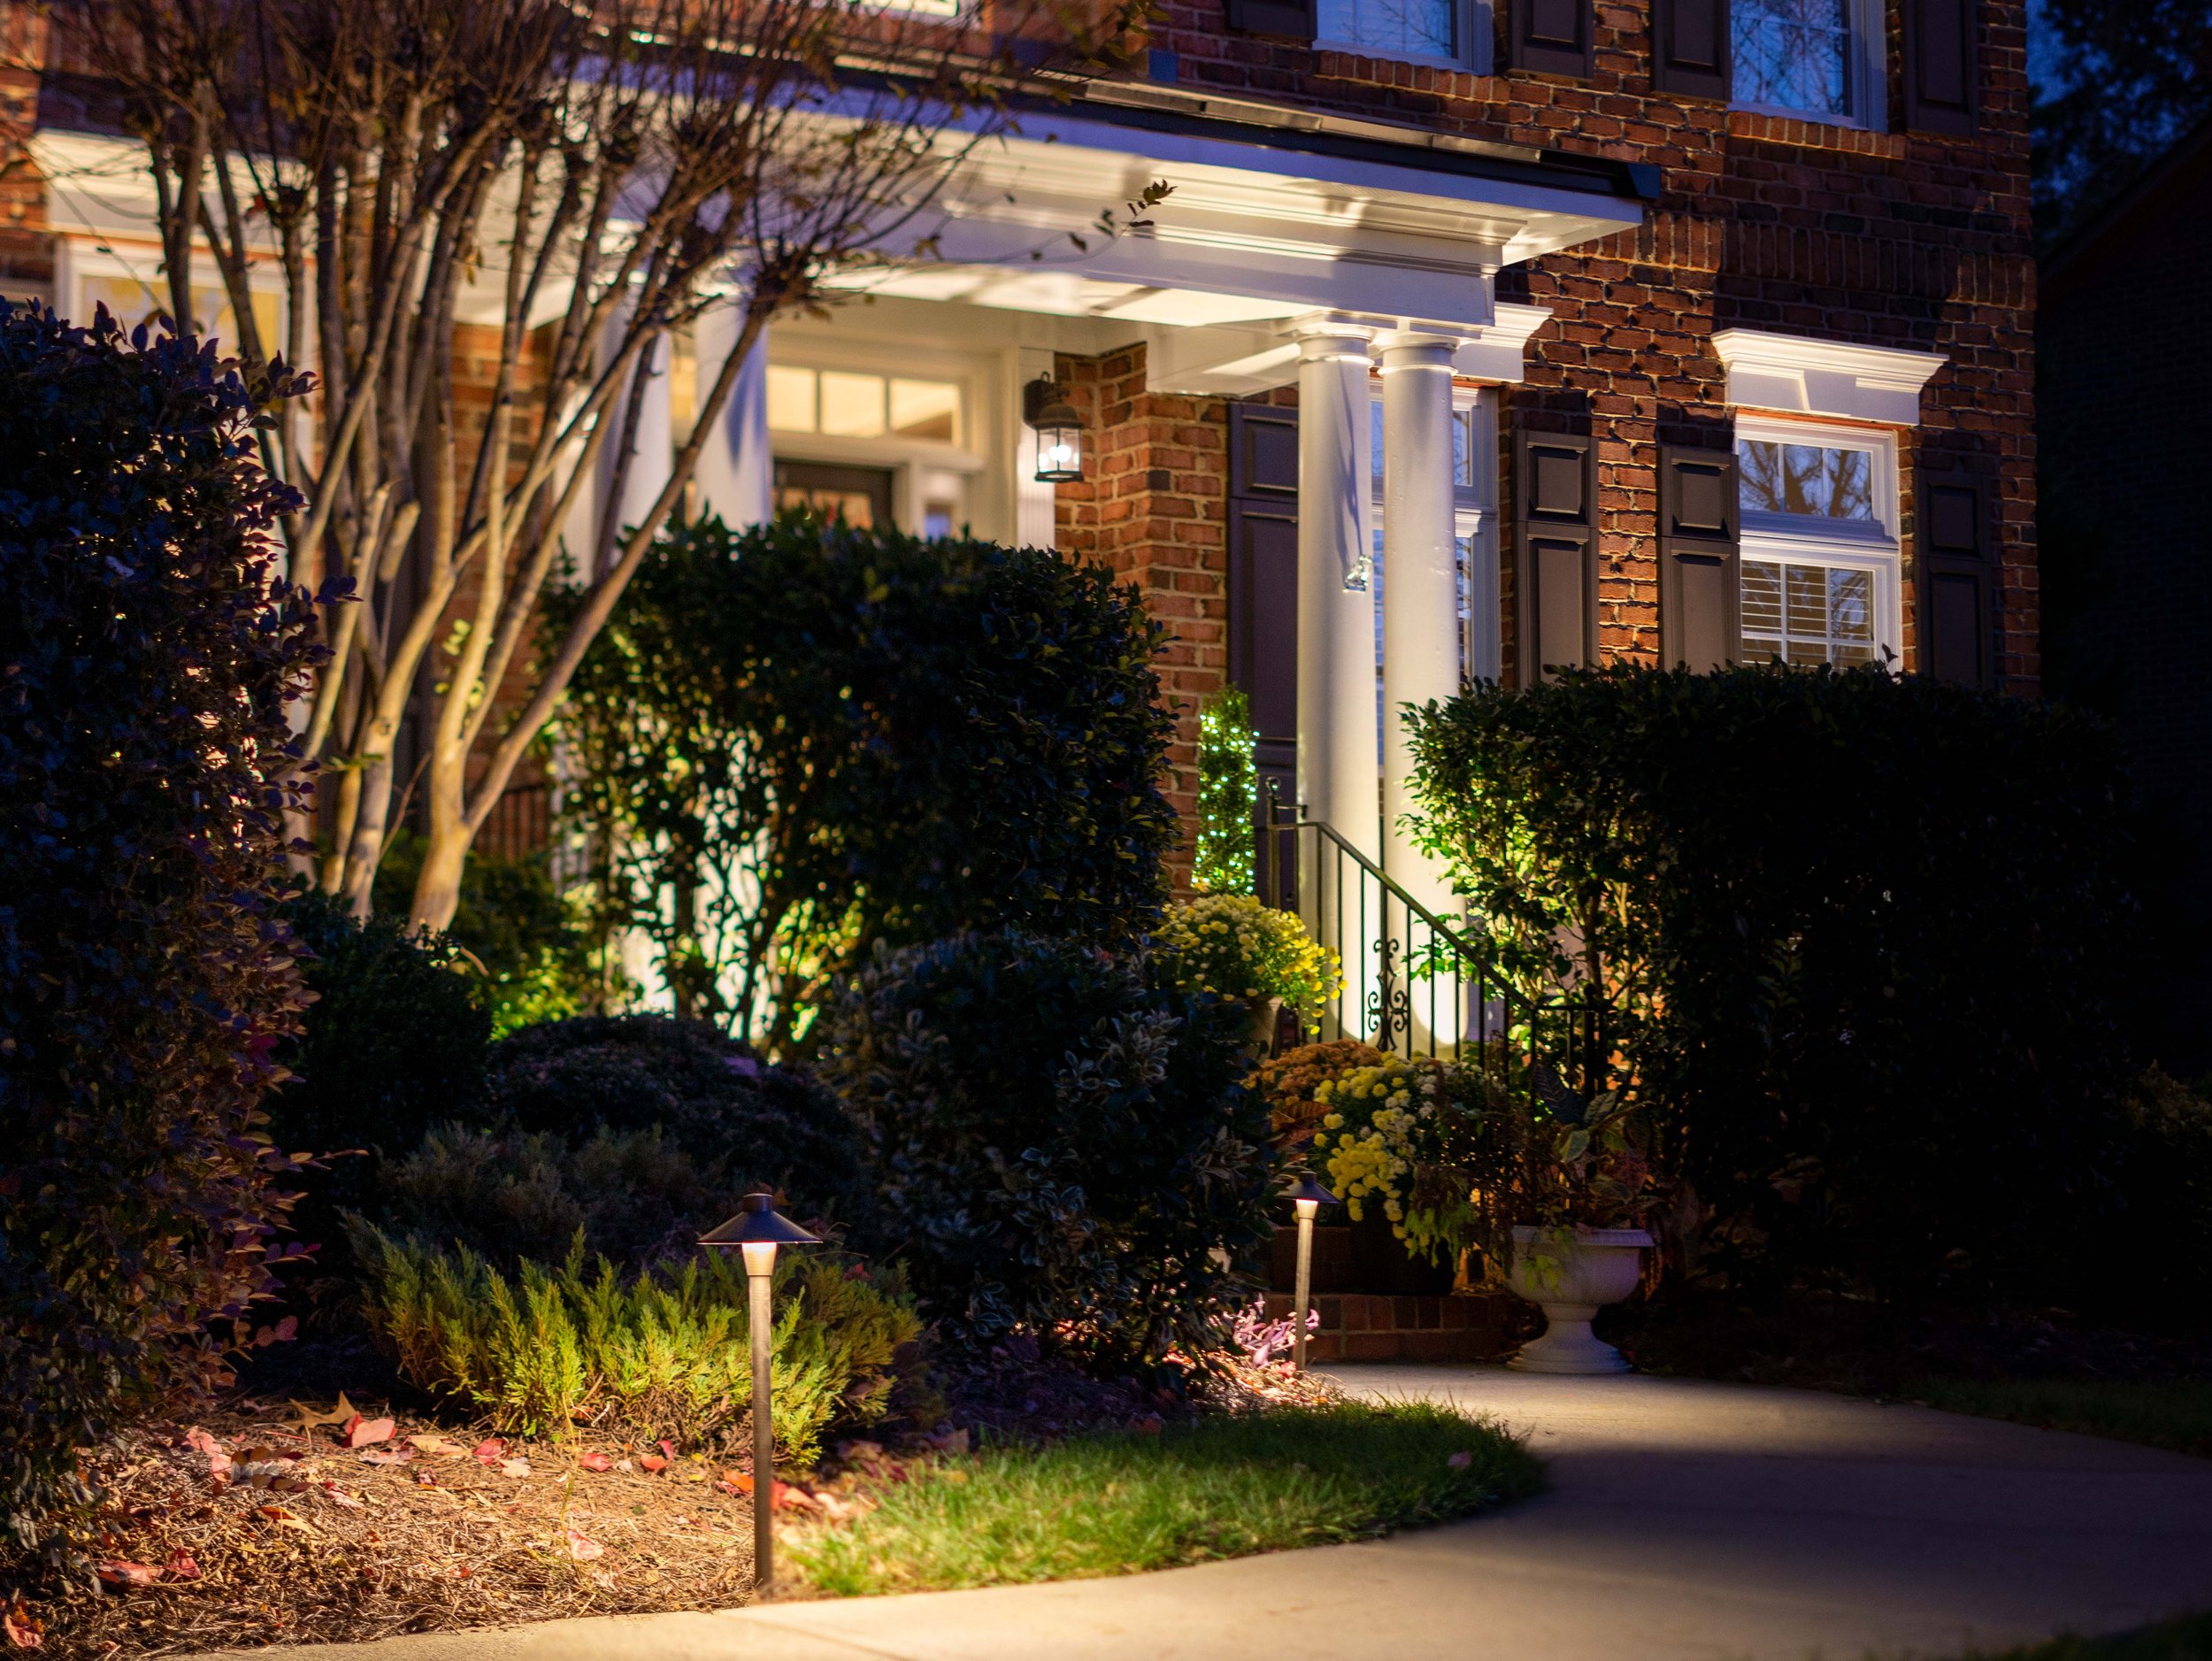  Inviting front of home illuminated with professionally designed and installed landscape lighting.  